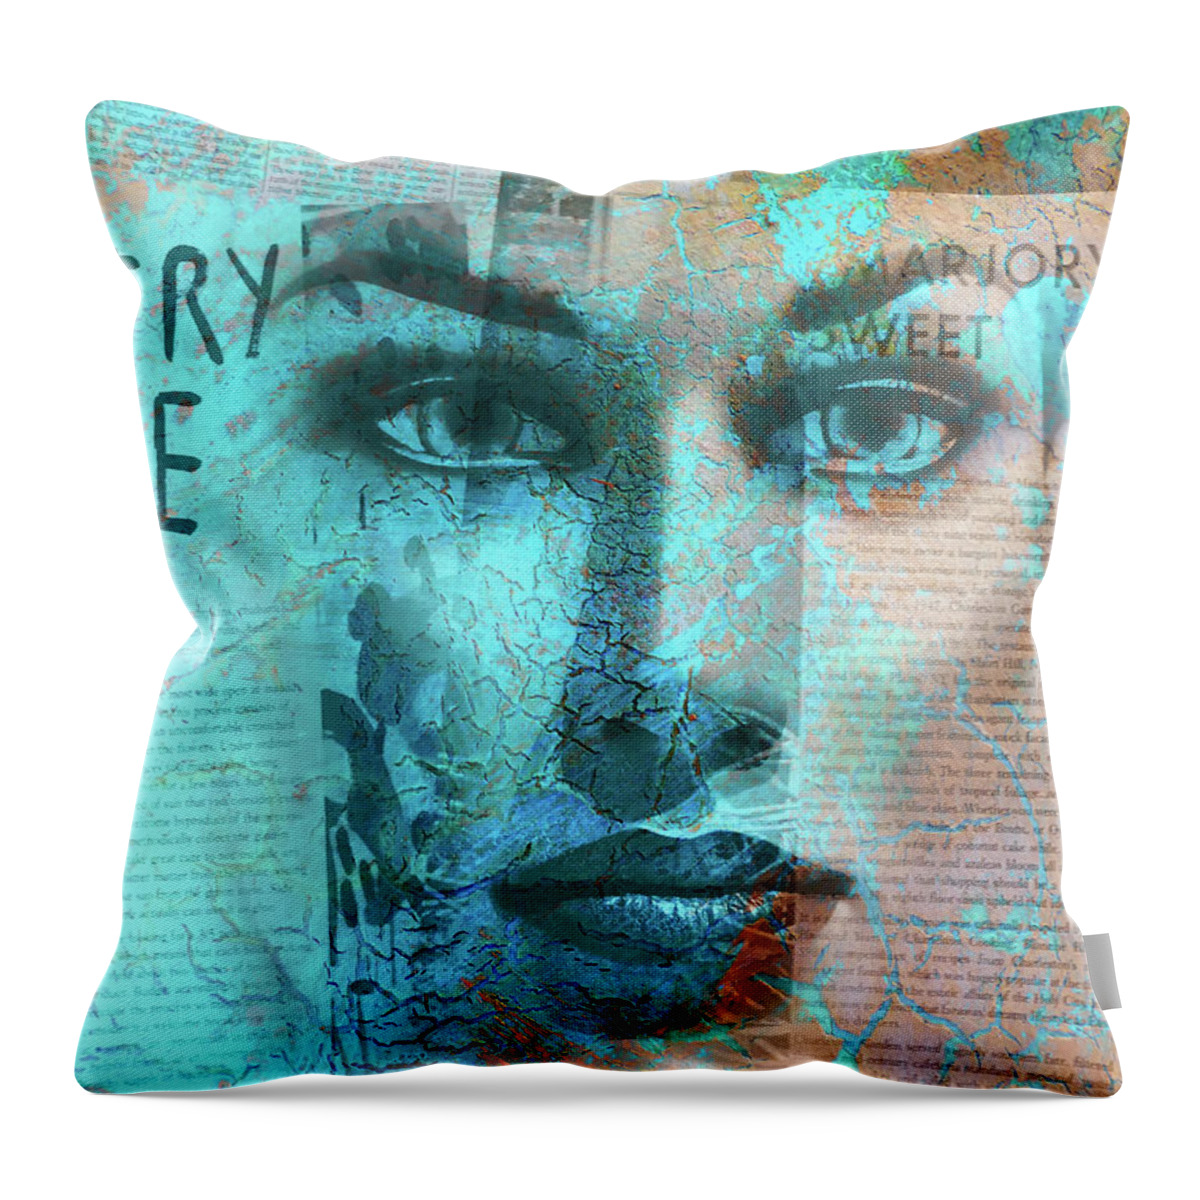 Letter Throw Pillow featuring the digital art The woman behind the letters by Gabi Hampe